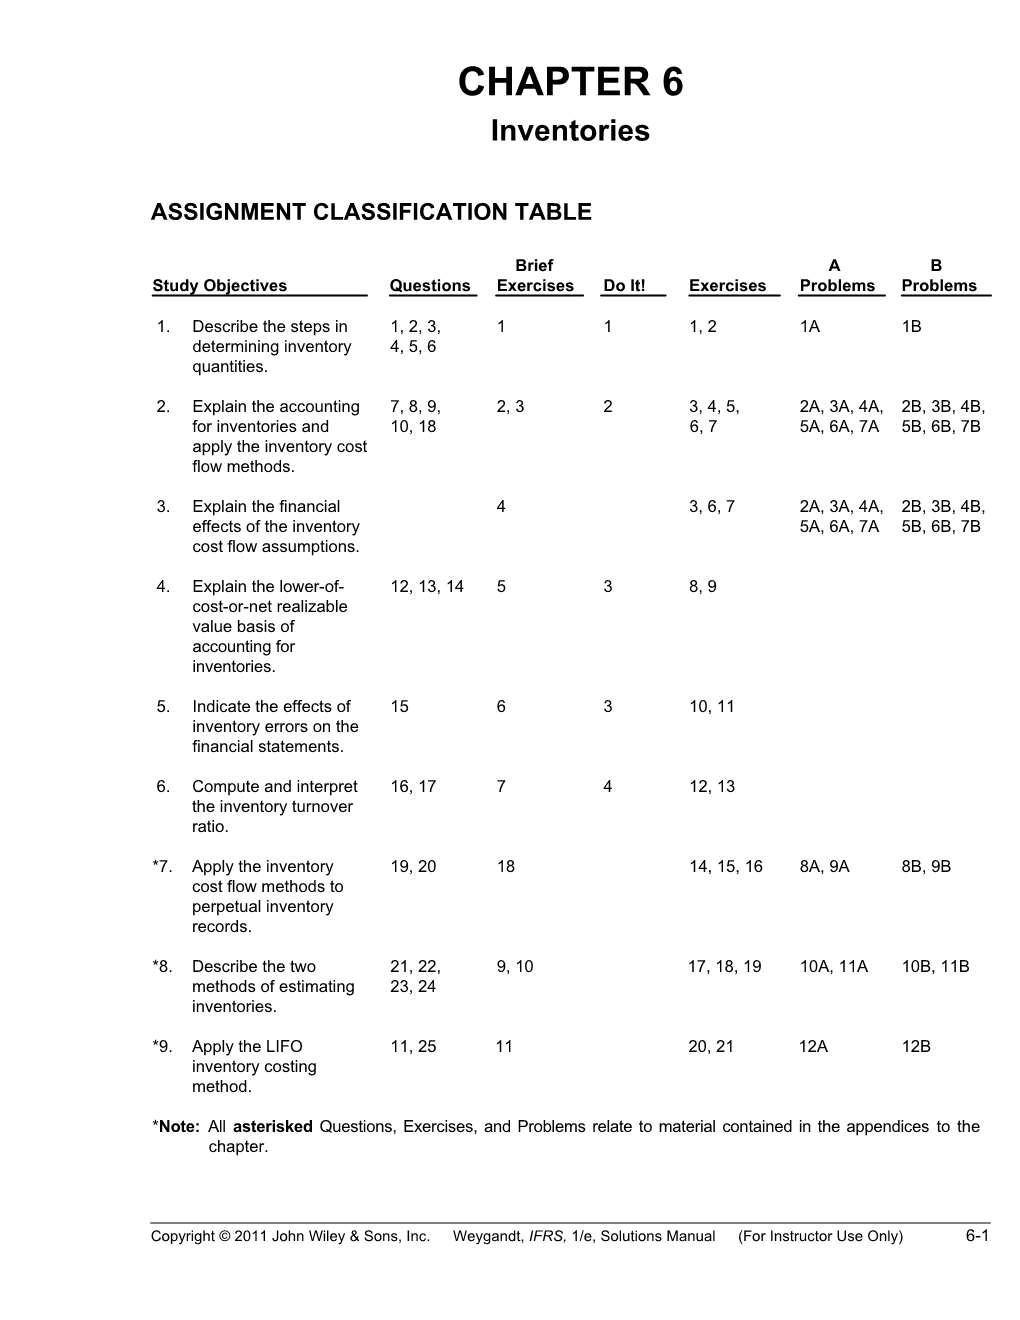 Assignment Classification Table